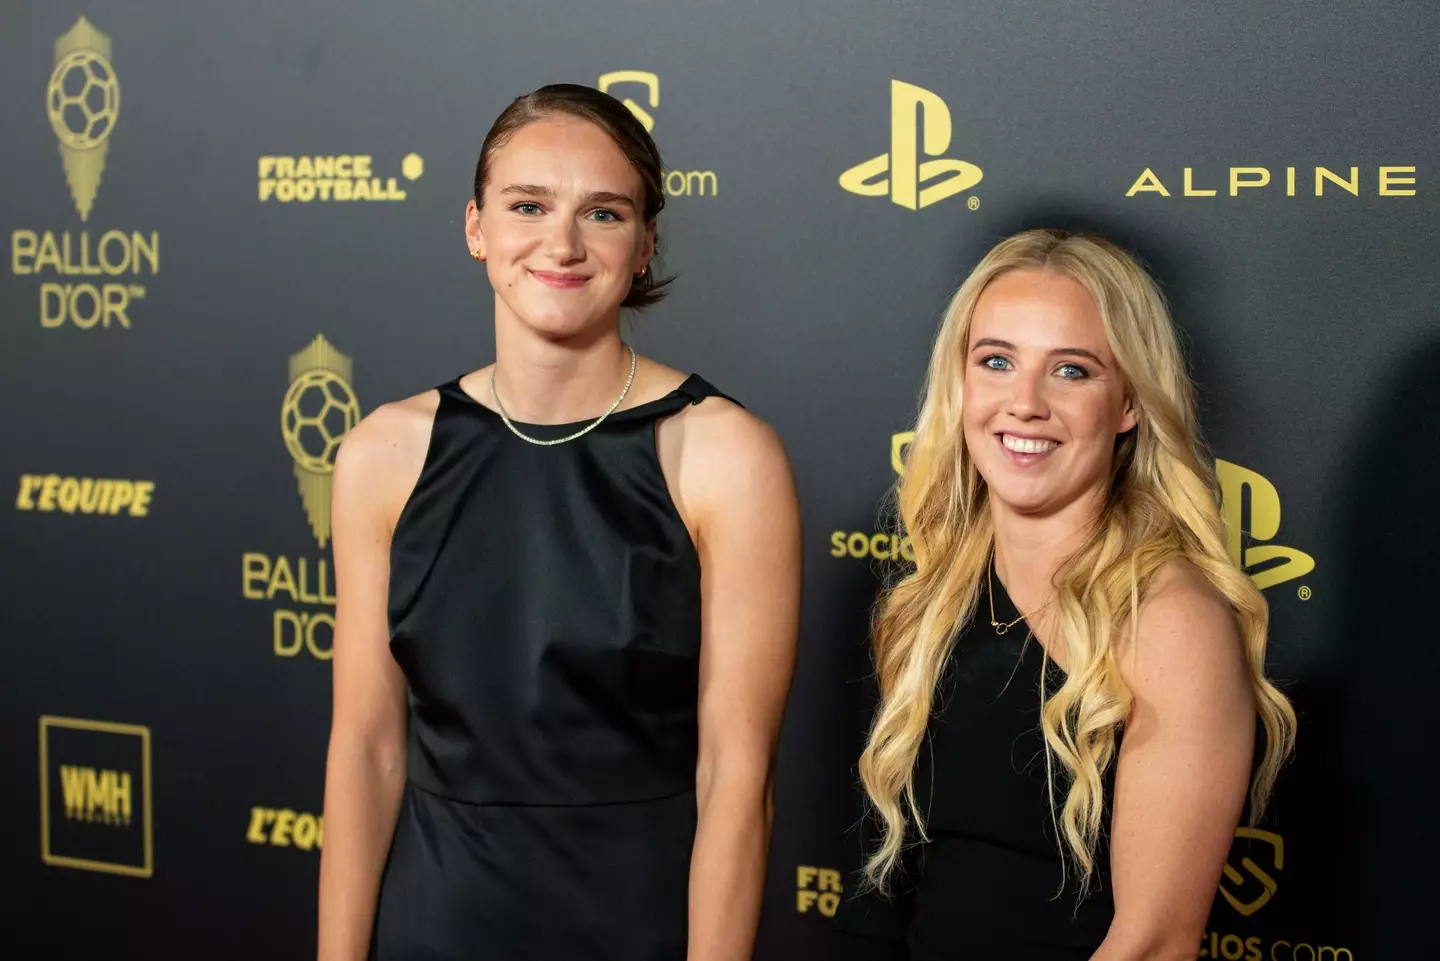 Miedema and Mead at the Ballon d'Or ceremony. (Image